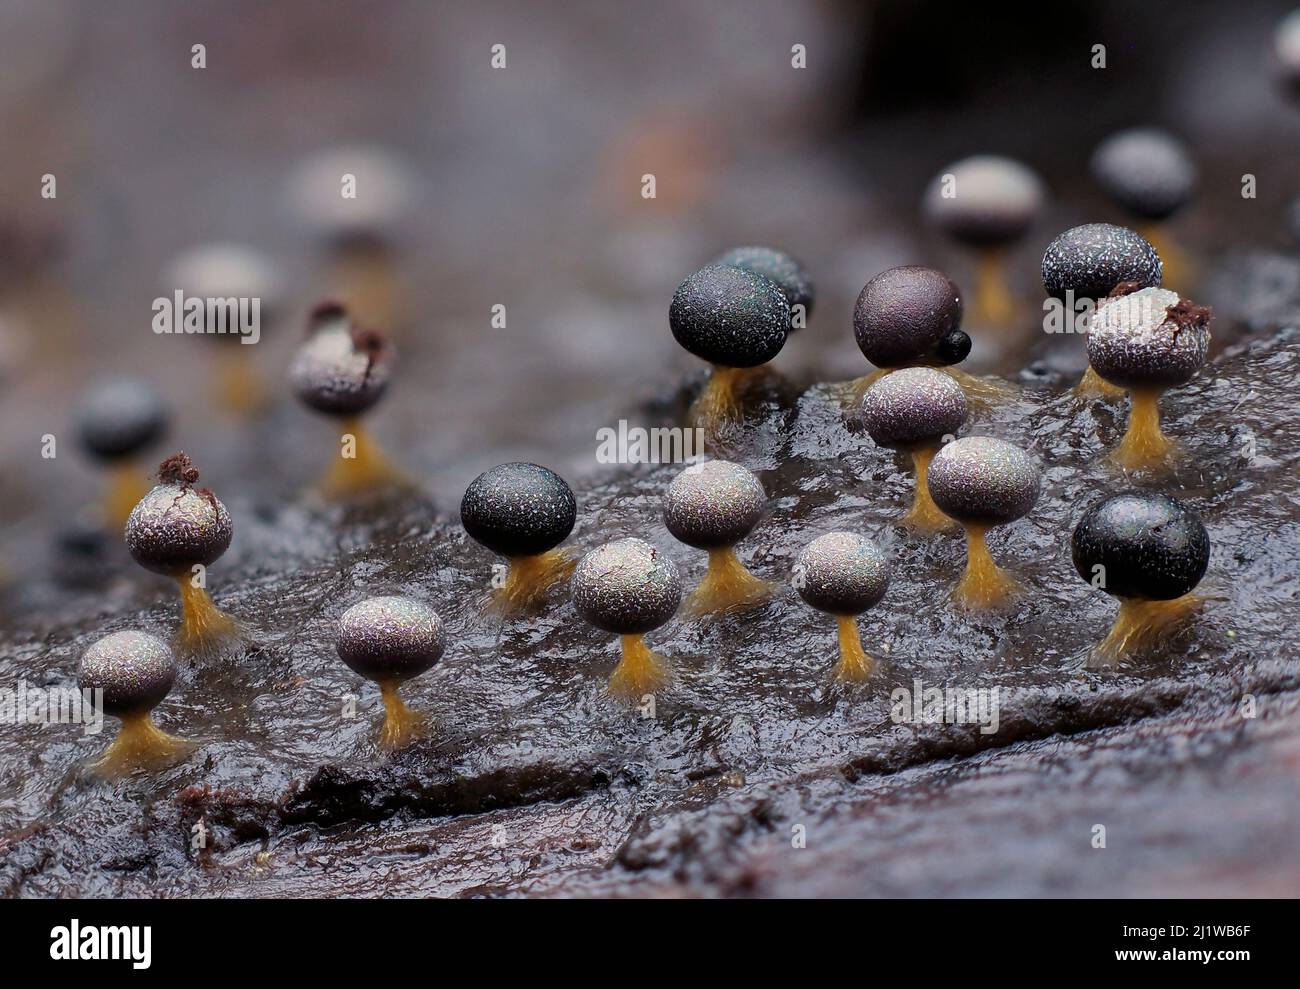 Slime mould (Physarum psittacinum), in mature reproductive phase. Close-up of erupting fruiting bodies (sporangia), bearing thousands of spores. Bucki Stock Photo